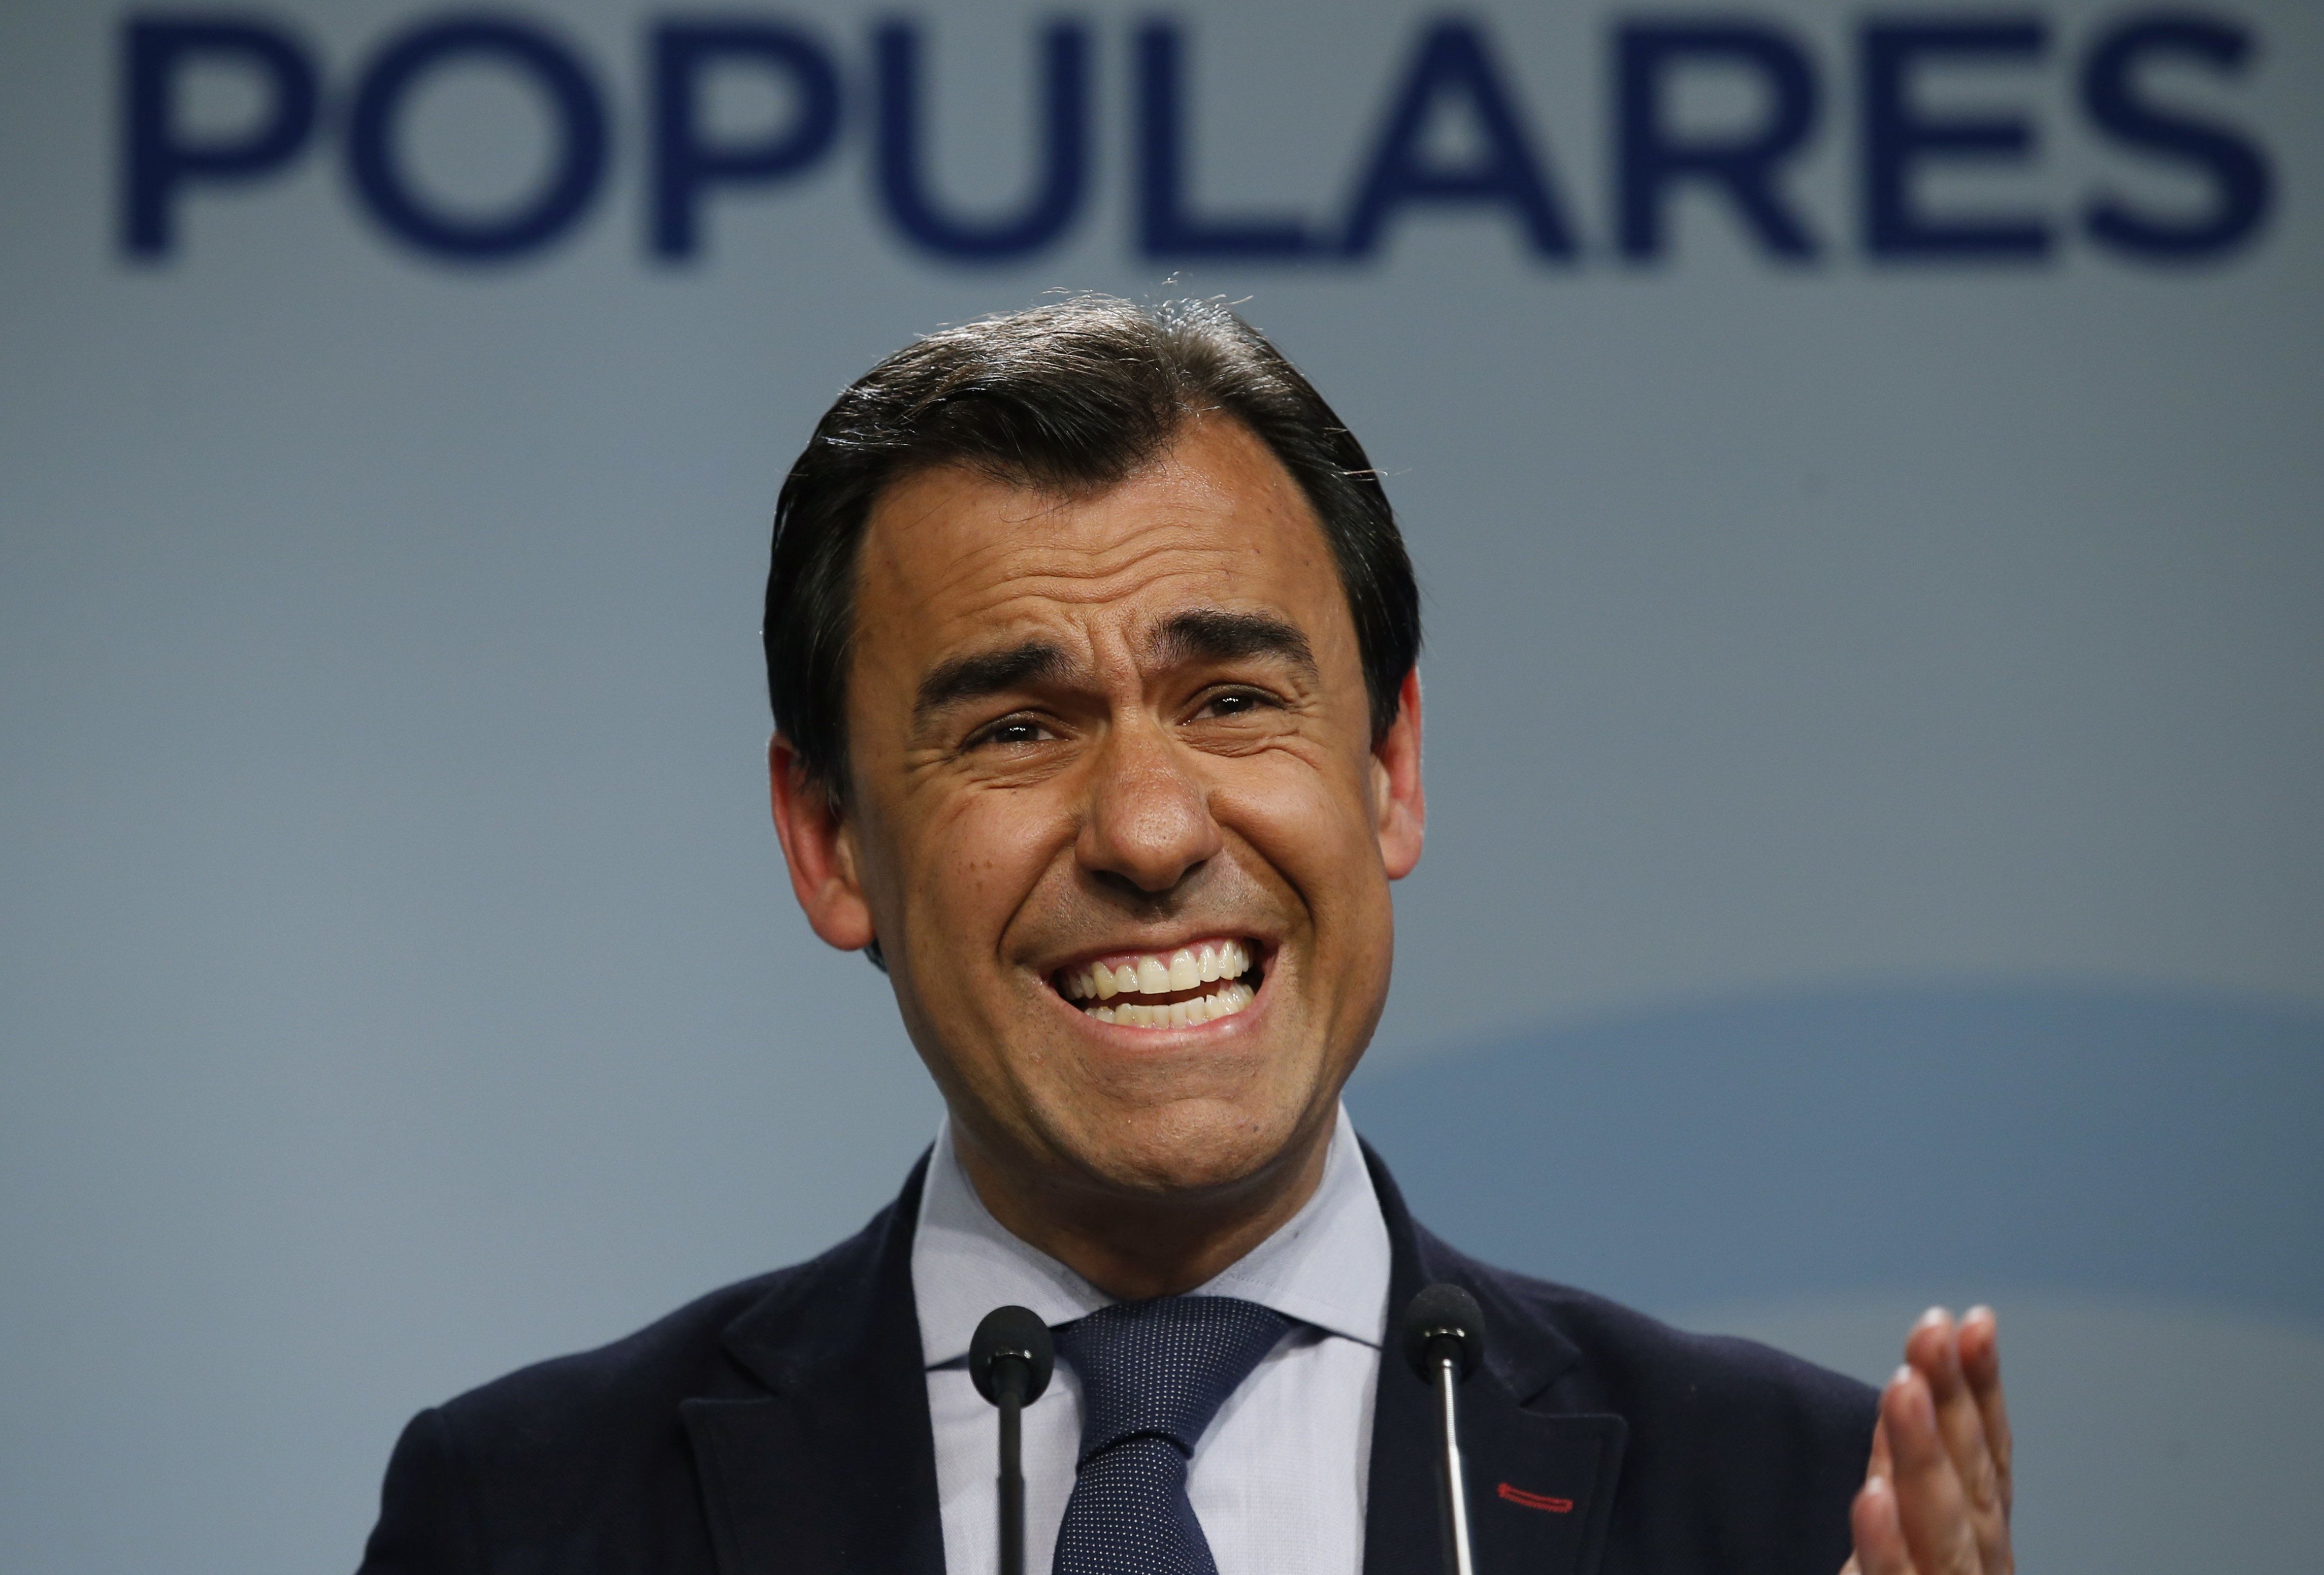 PP's Maíllo: "Sánchez will go down in history as the Judas of Spain"